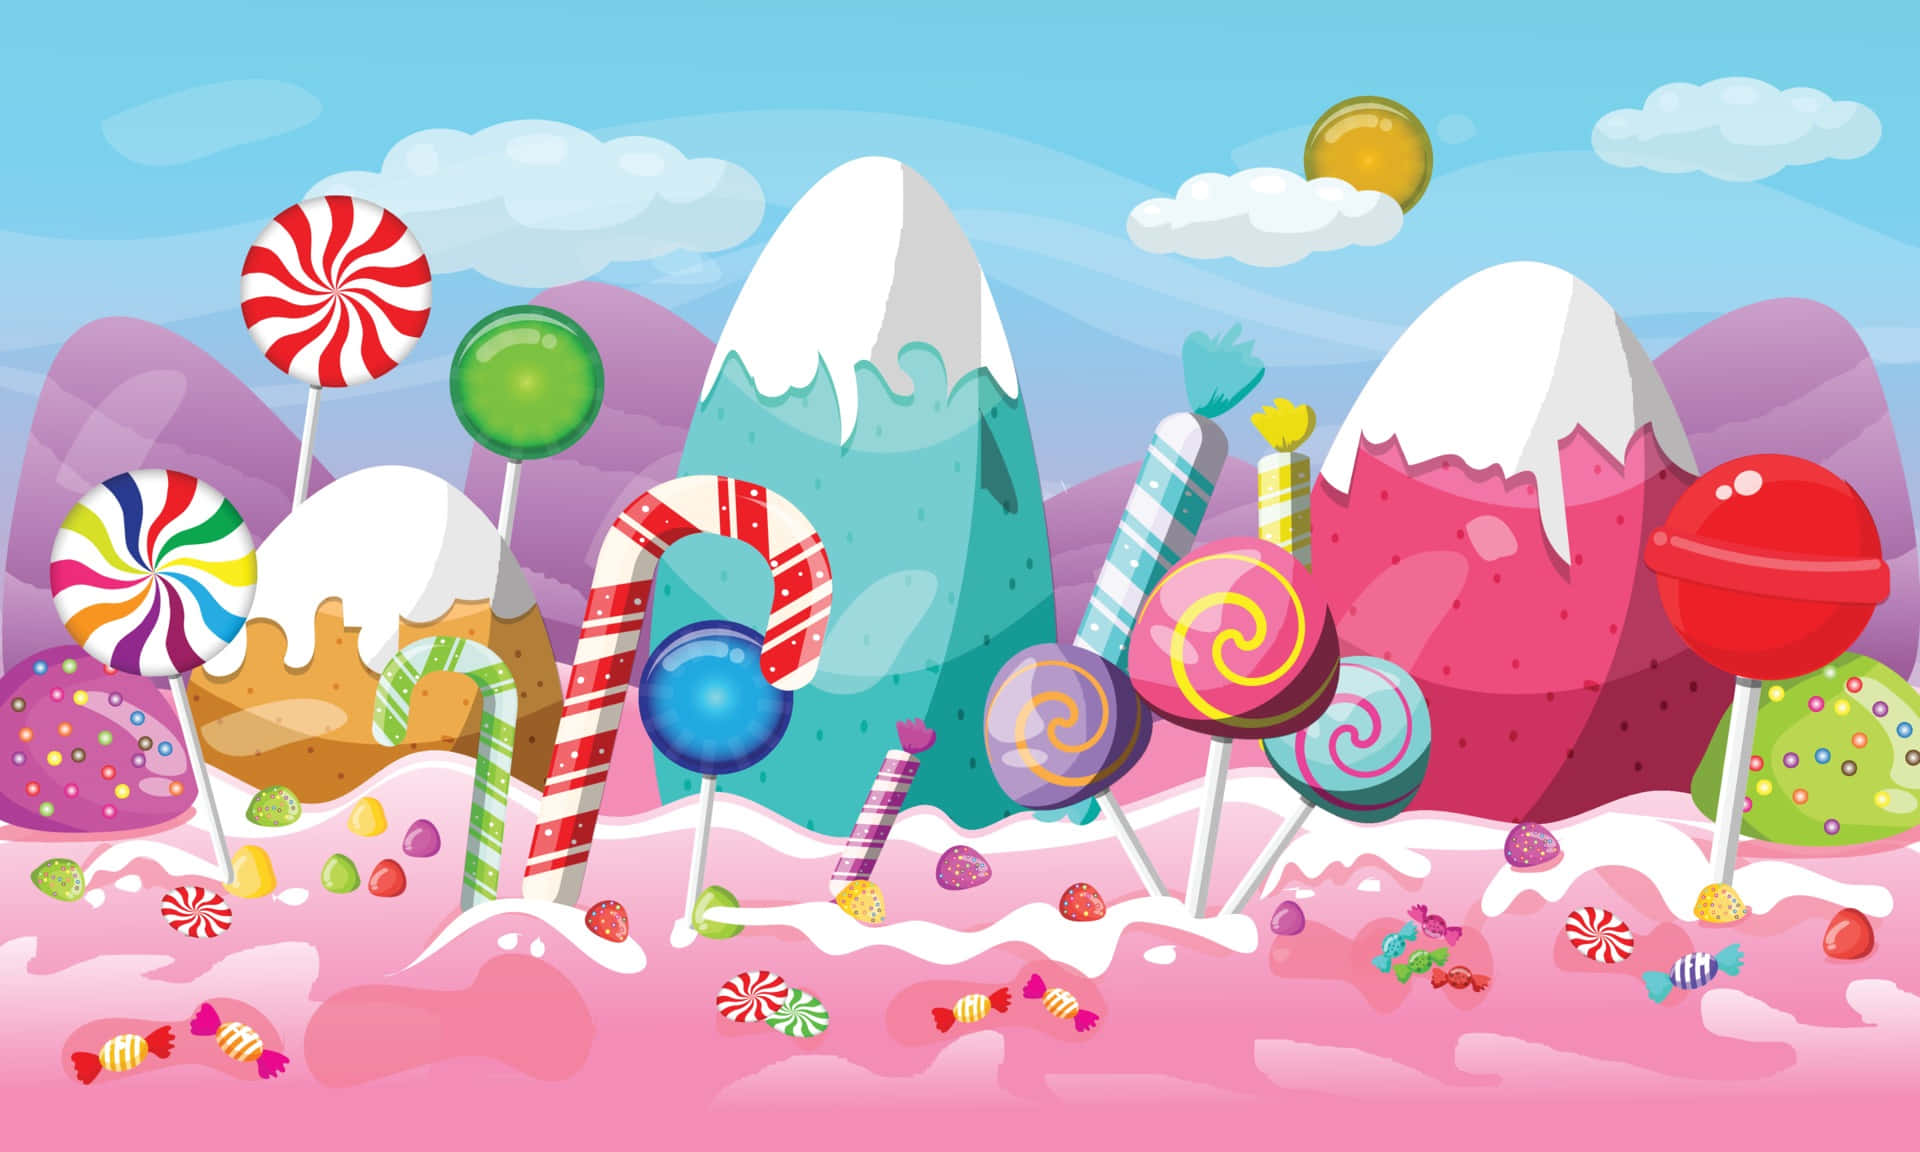 A Cartoon Background With Candy And Candies